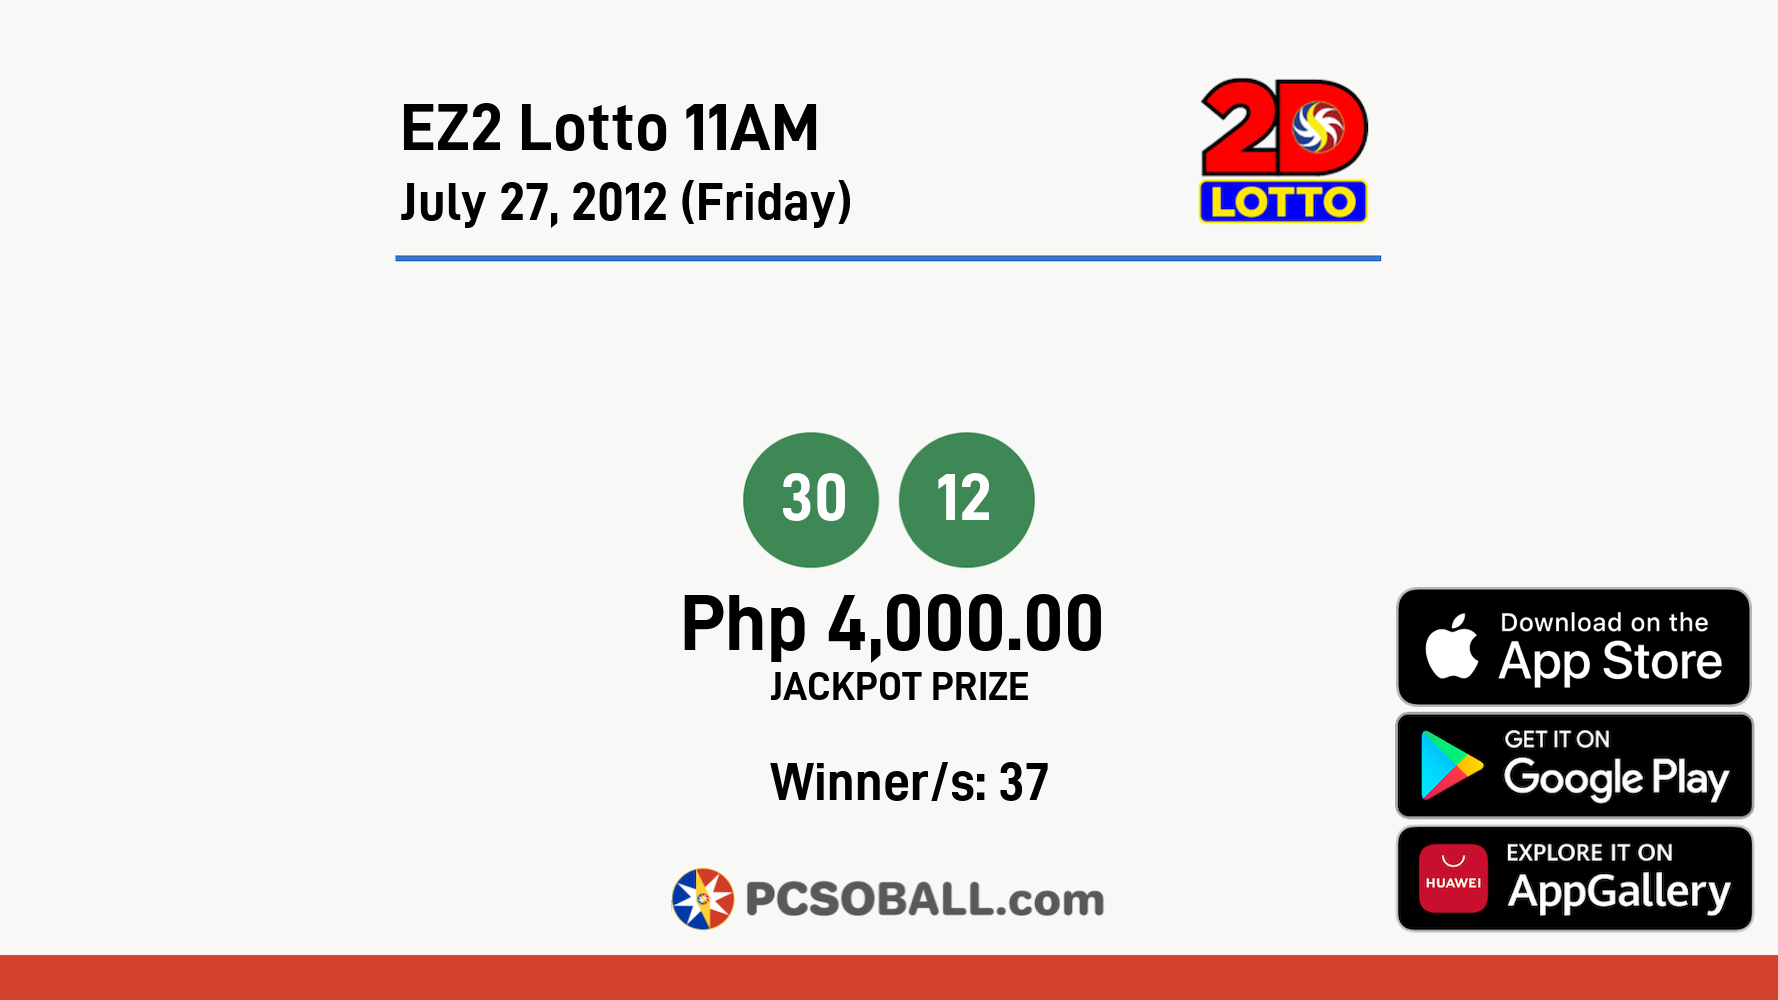 EZ2 Lotto 11AM July 27, 2012 (Friday) Result